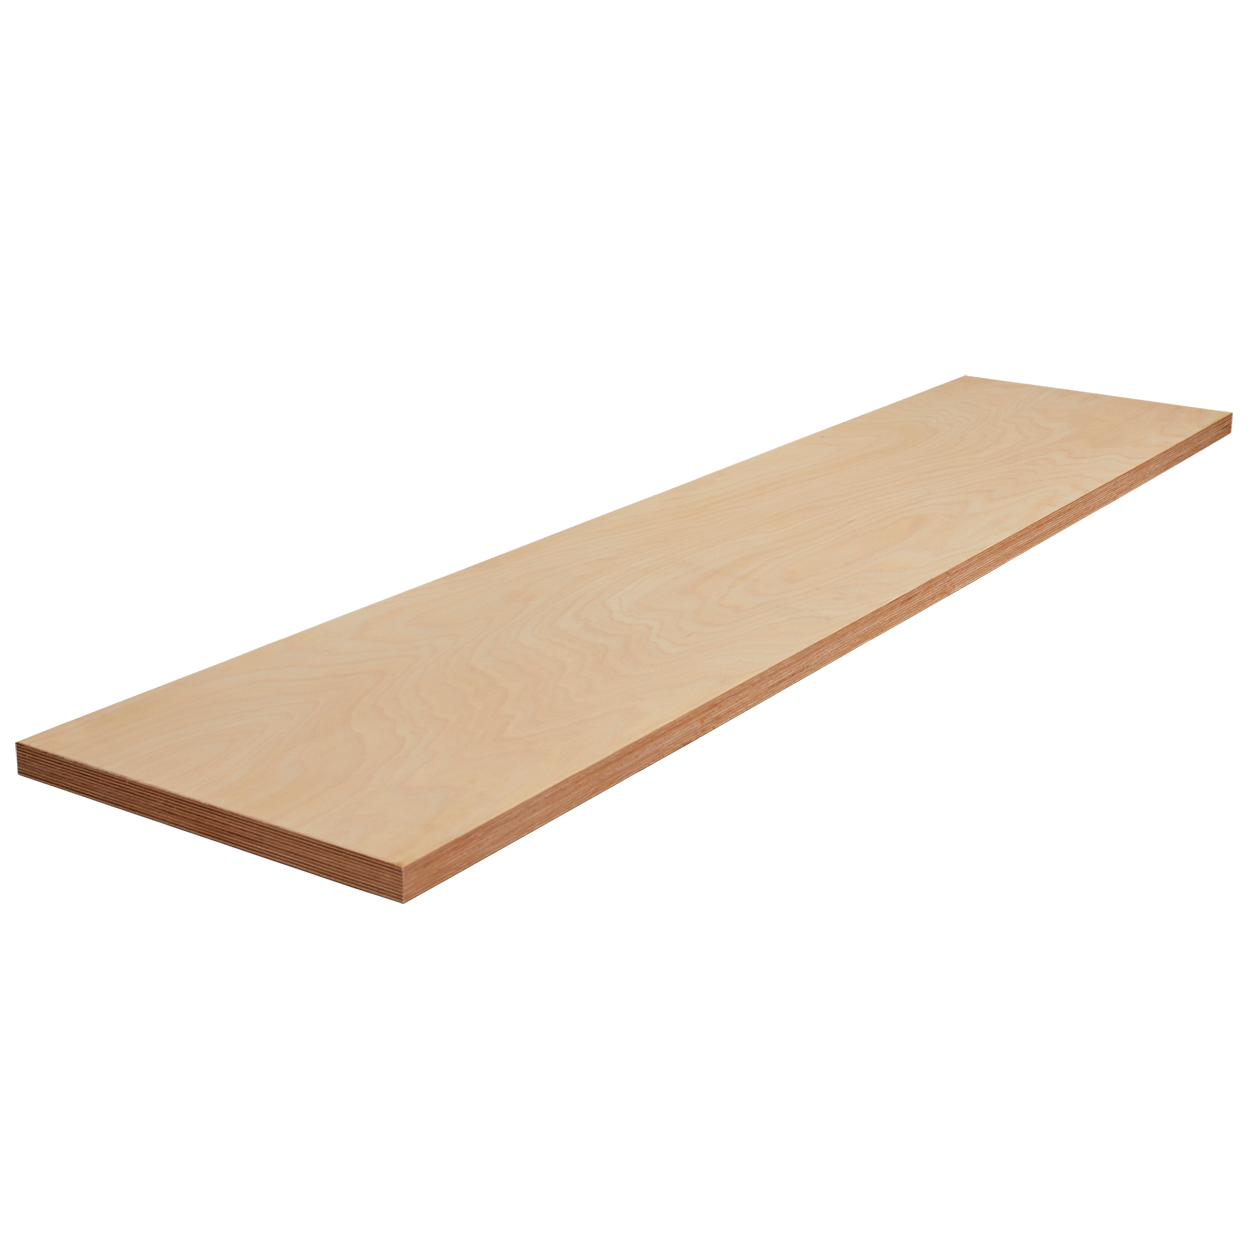 Beech plywood bench top for 3 units - length 204cm